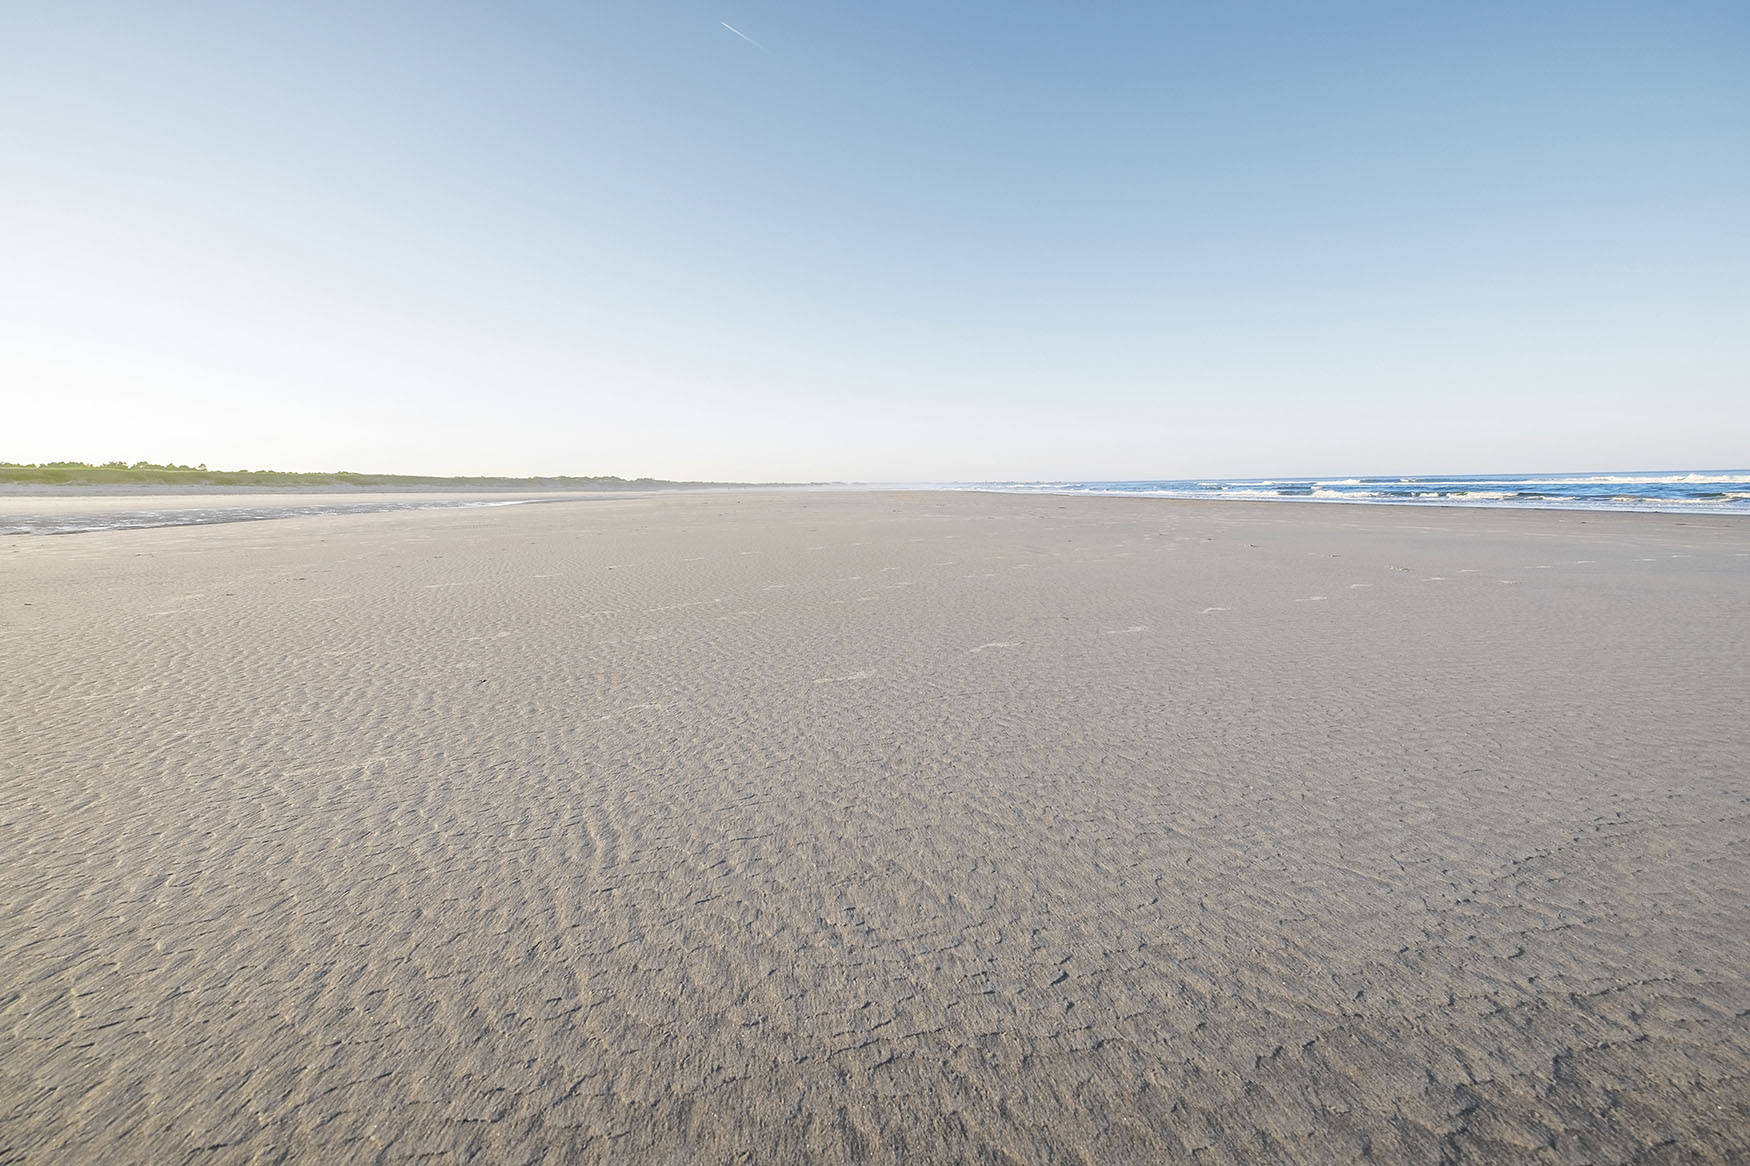 Eric J. Taubert, "how is it, in this crowded world, we can still sometimes find ourselves completely alone, even where it's beautiful | main beach, ogunquit, maine", Aluminum Archival Dye Sublimation (Matte) Print, 24" x 16"